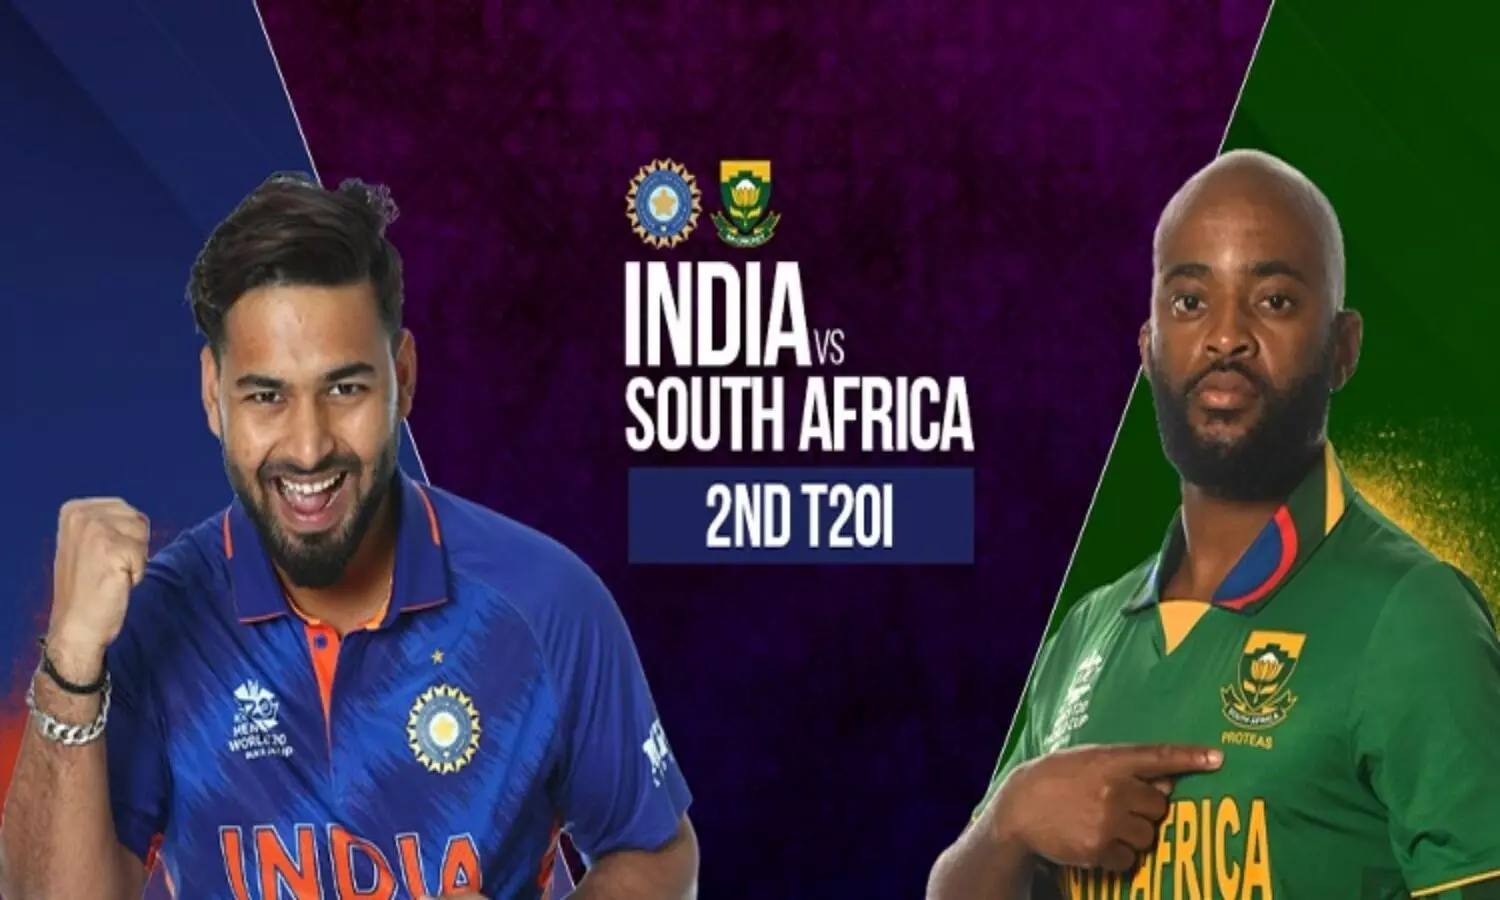 India vs South Africa T20 Series